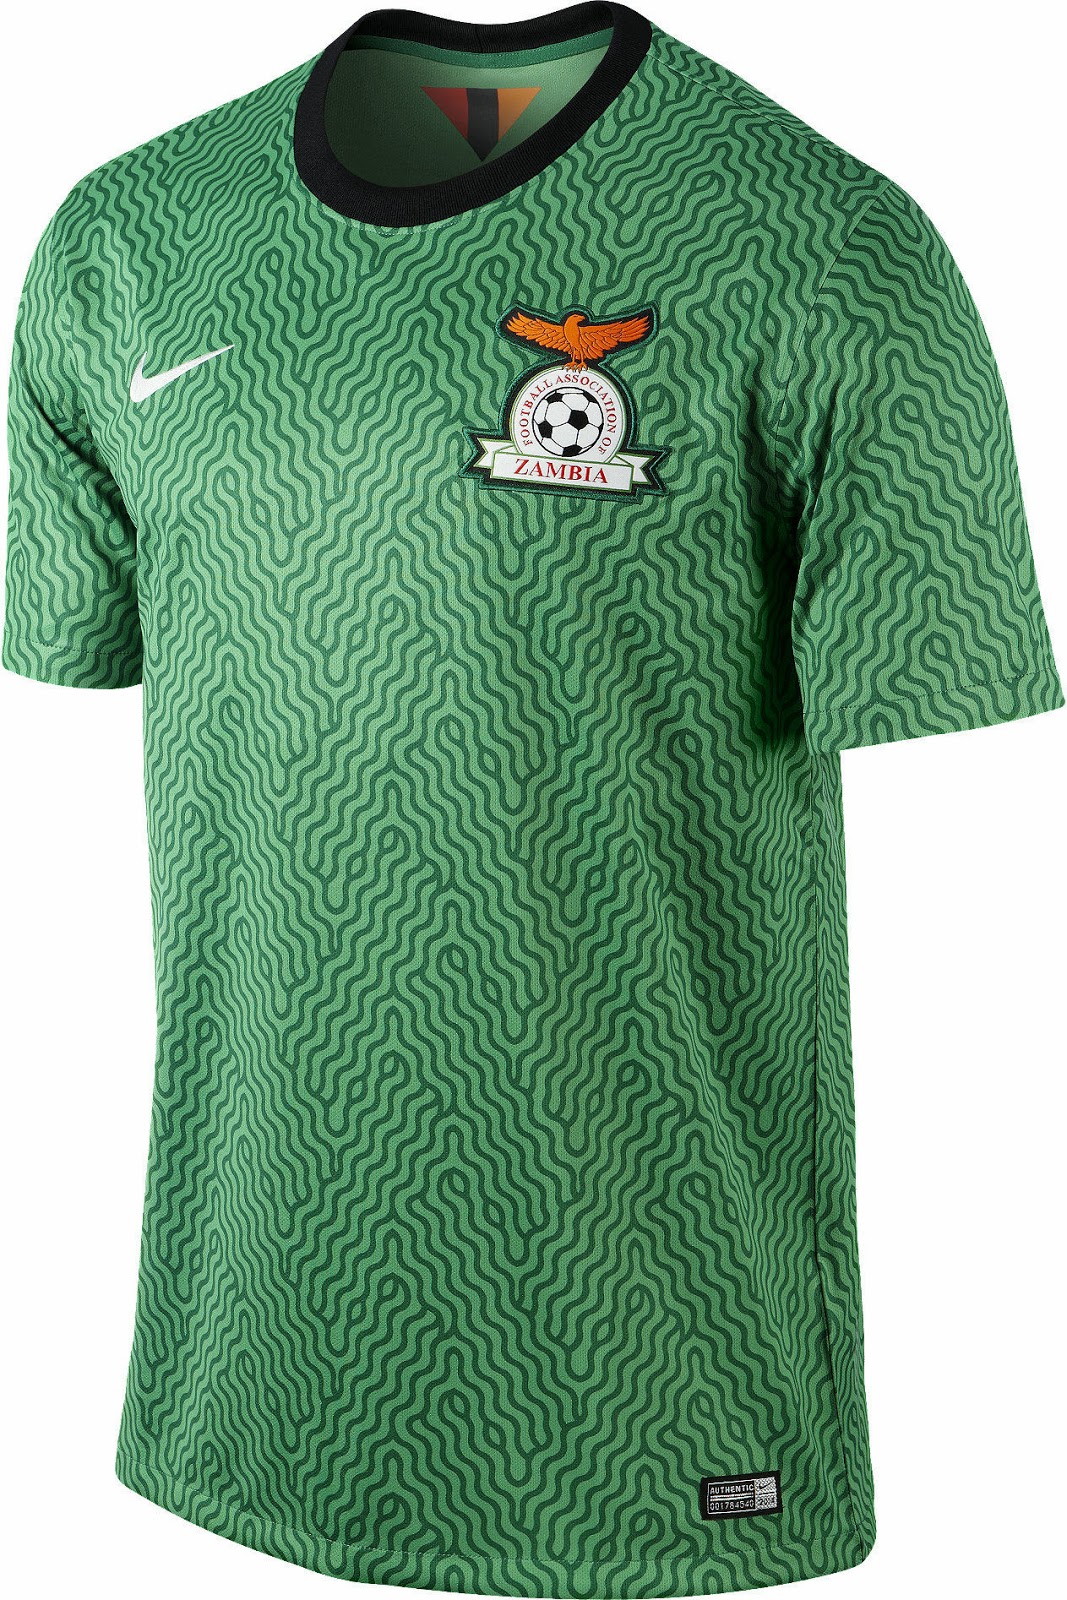 Zambia 2014 Home and Away Kits Released - Footy Headlines